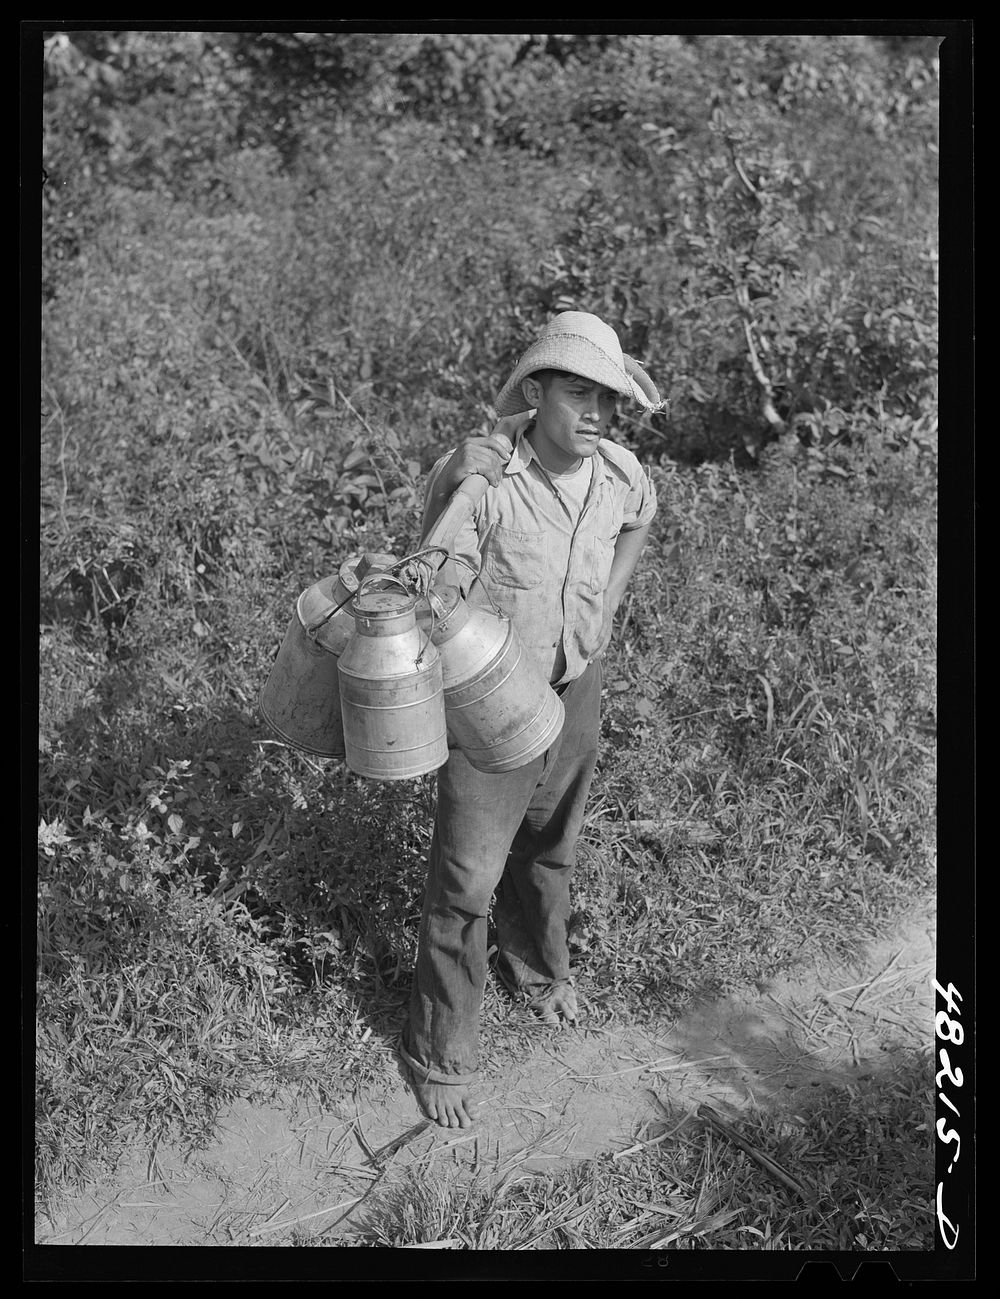 [Untitled photo, possibly related to: Utuado, Puerto Rico (vicinity). Milkman on a road]. Sourced from the Library of…